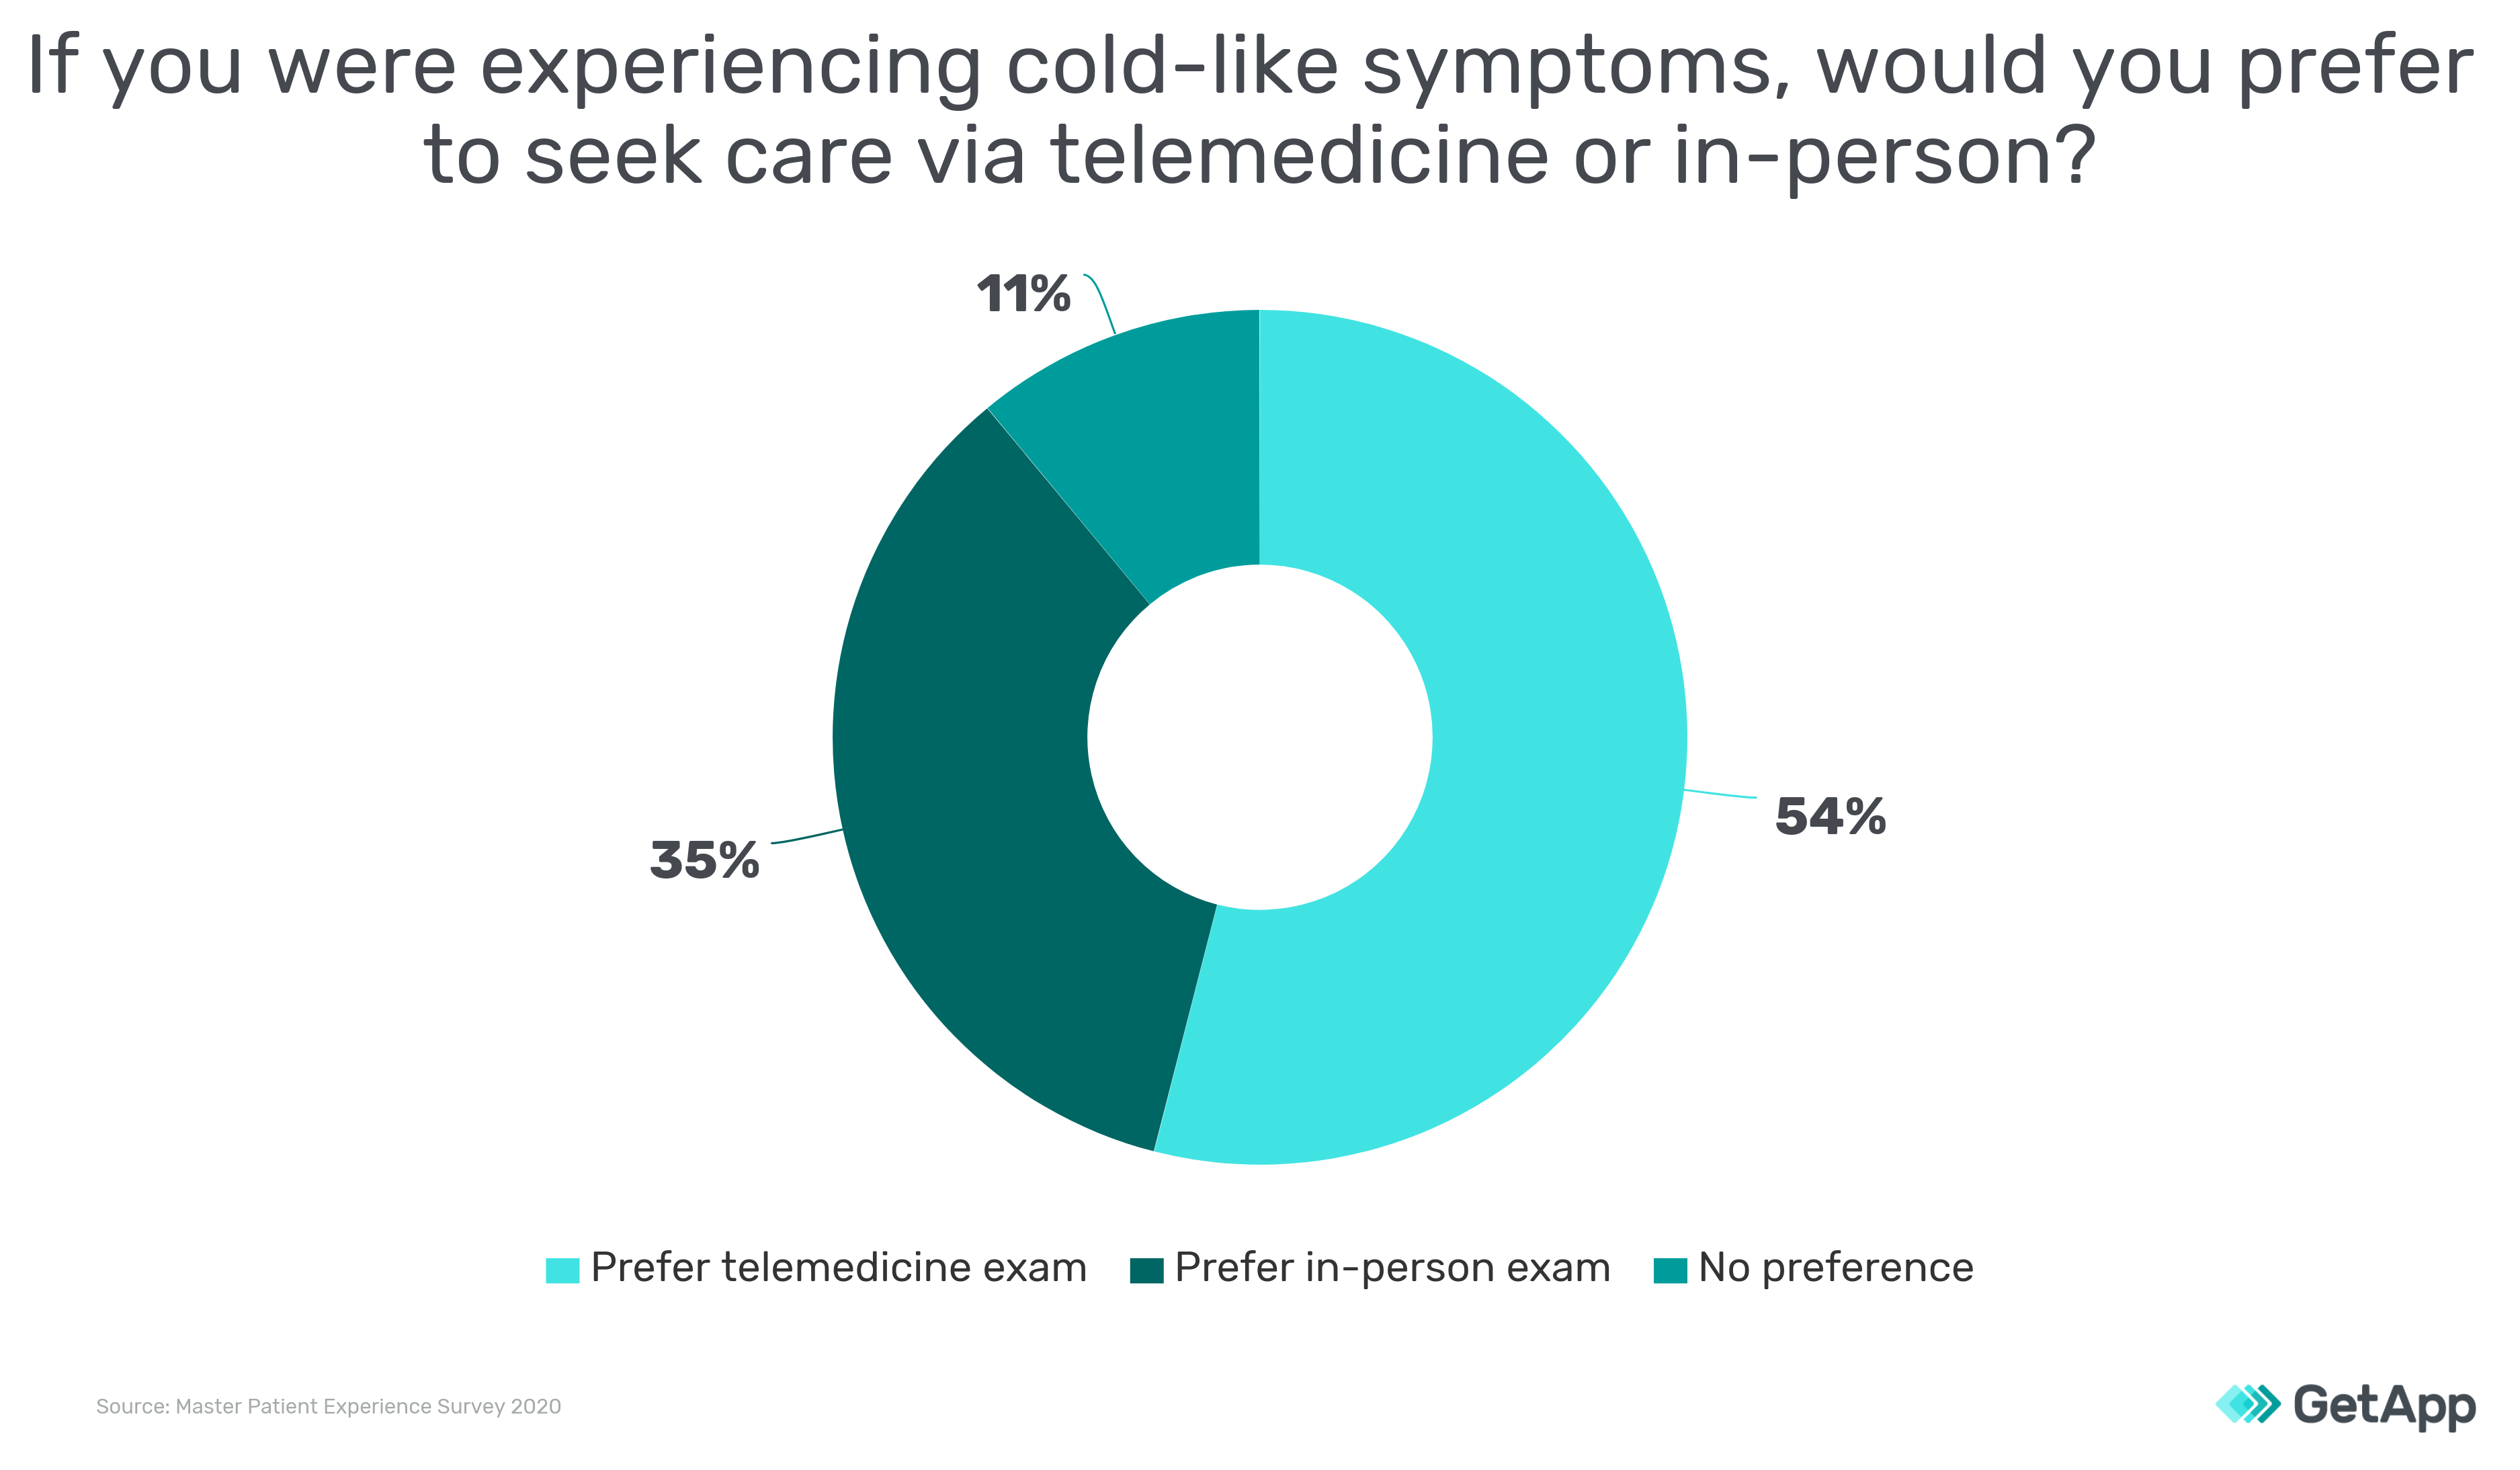 Telemedicine for colds